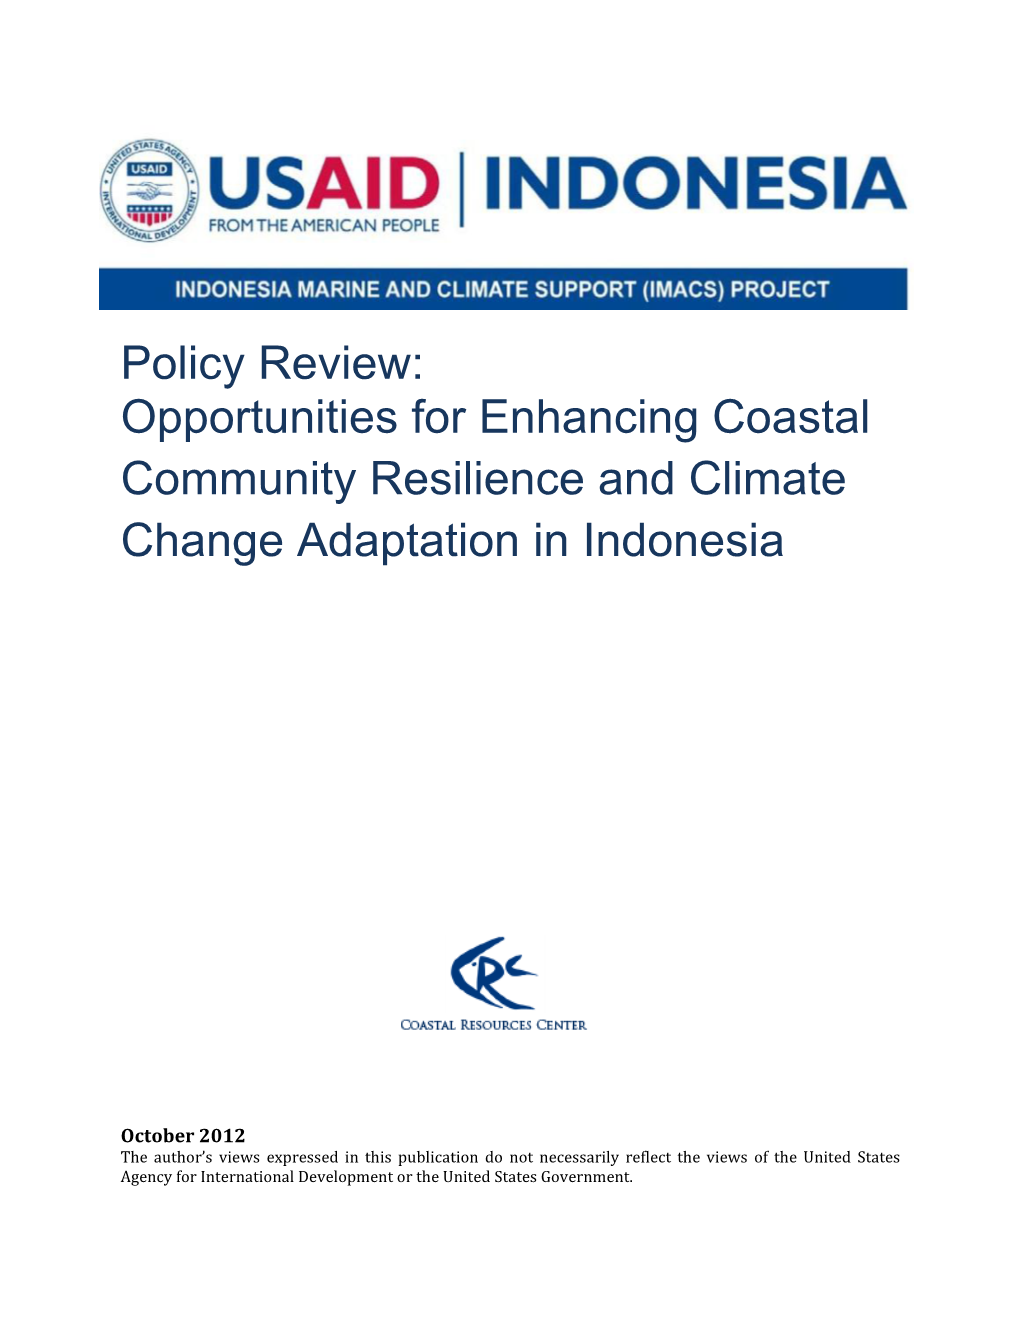 Opportunities for Enhancing Coastal Community Resilience and Climate Change Adaptation in Indonesia